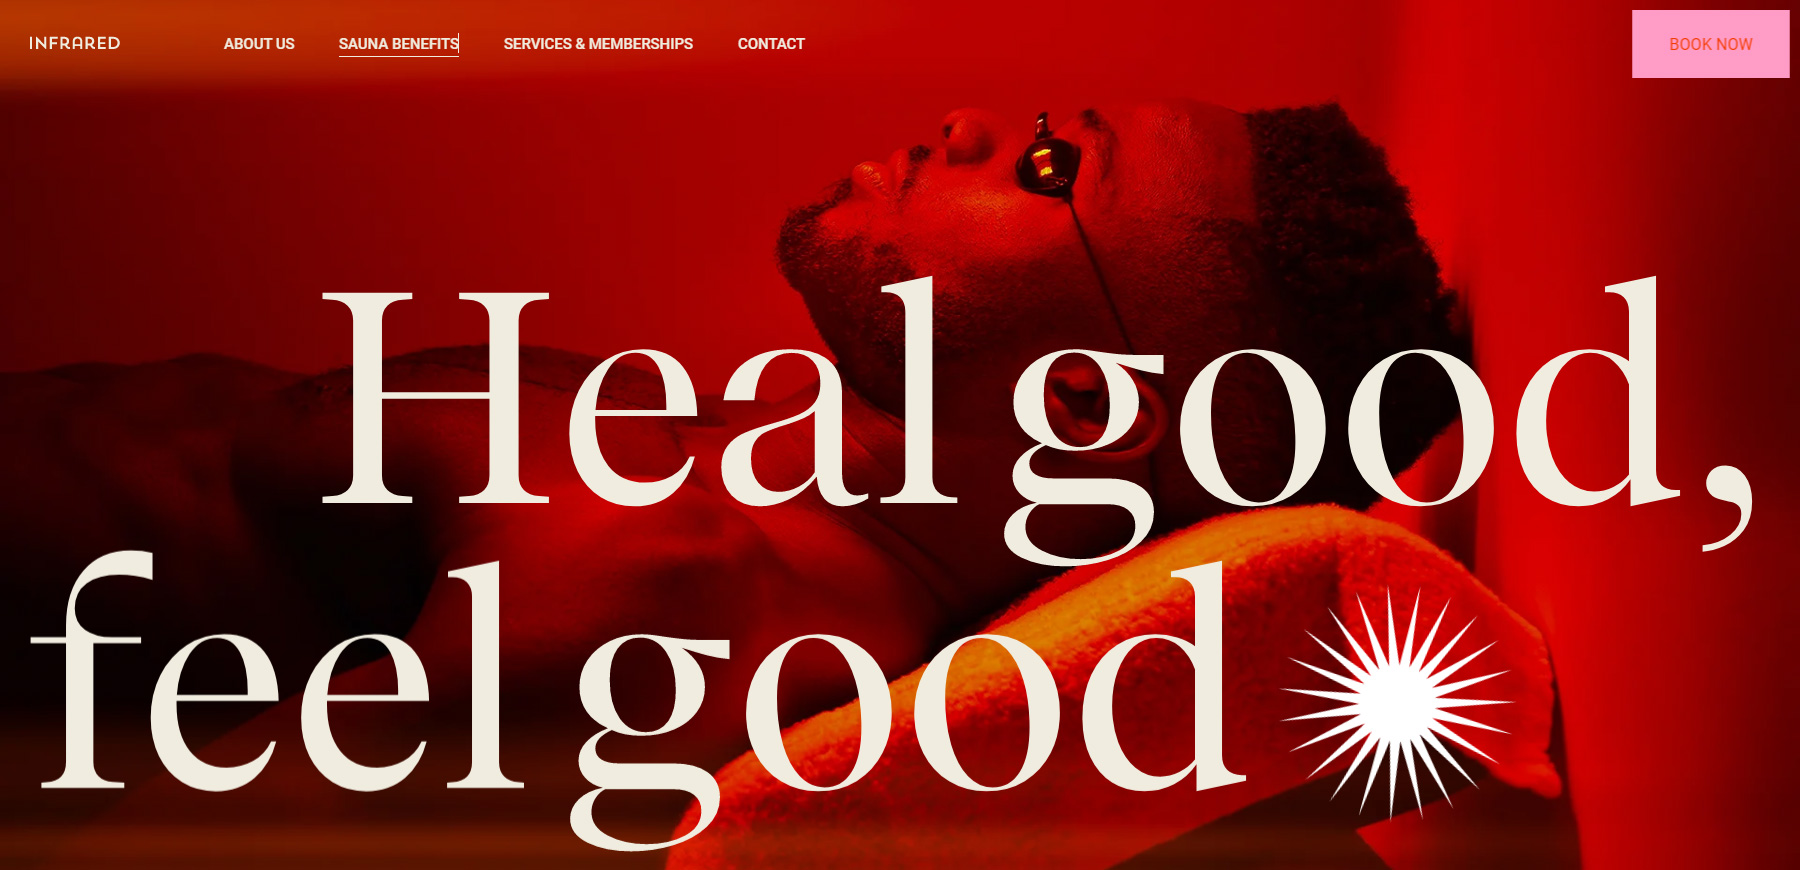 Infrared Promo Website - Website of the Day